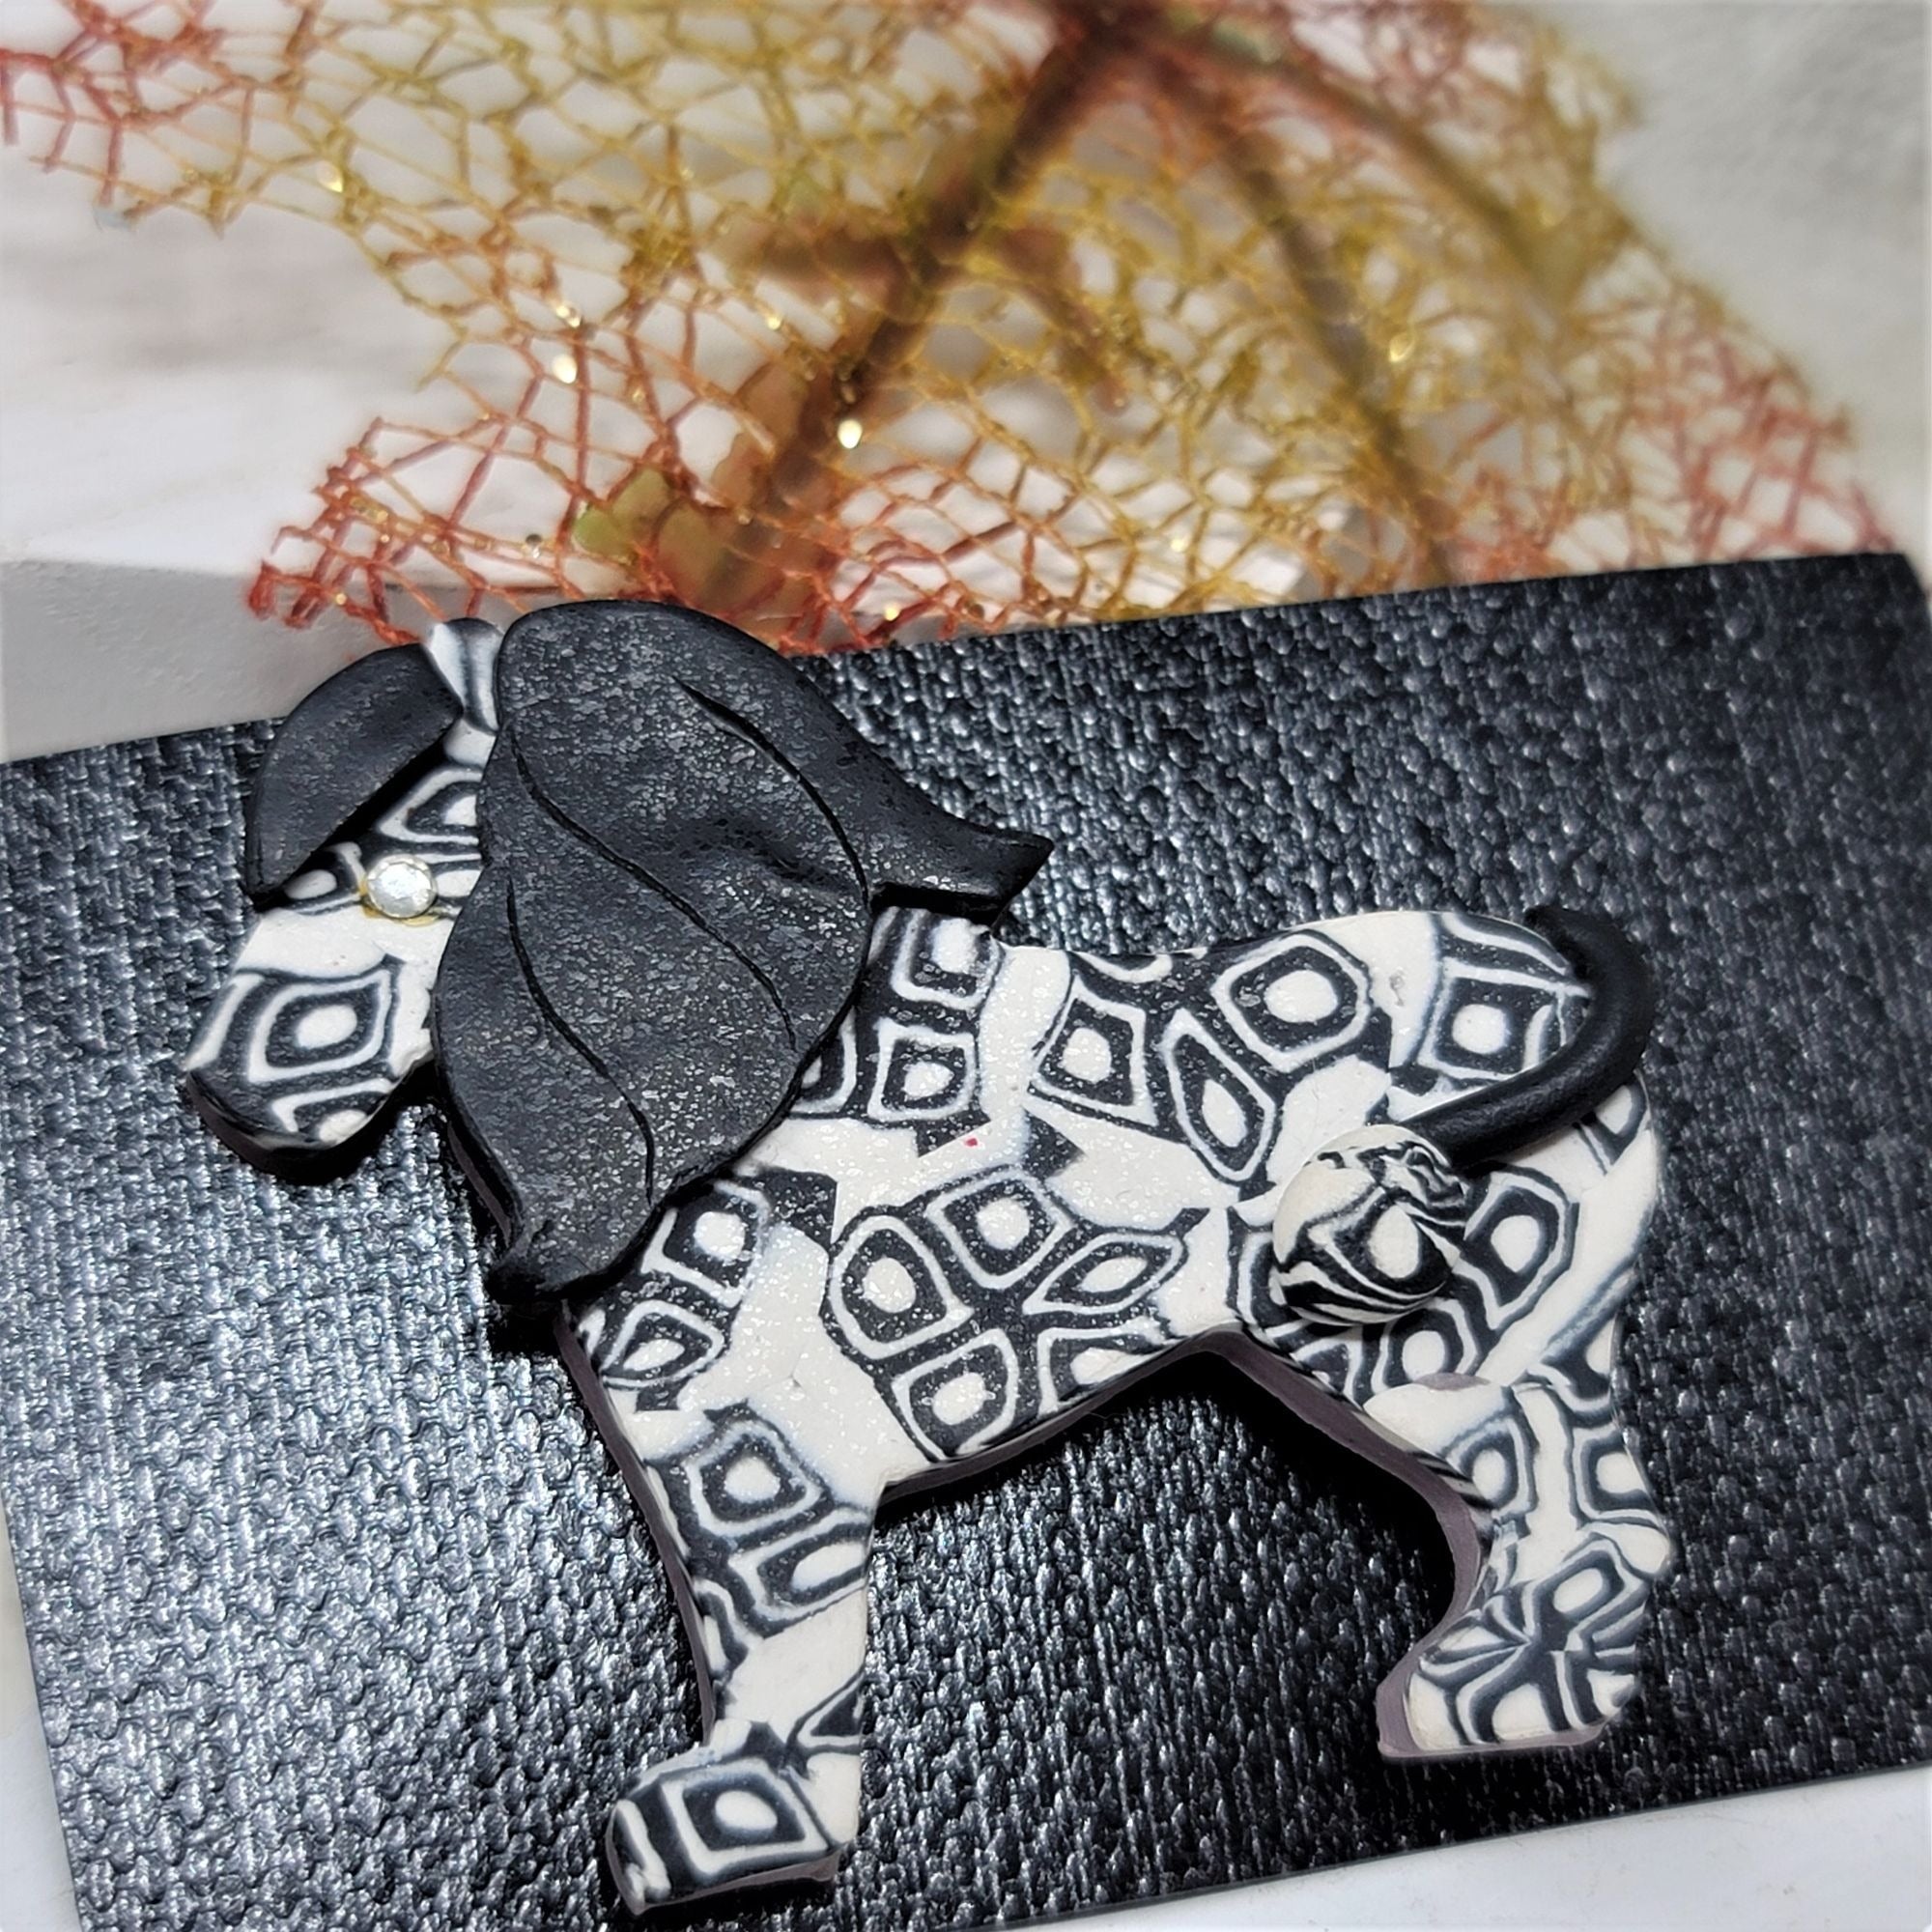 Adorable Clay Animal Pin Brooch Black n White